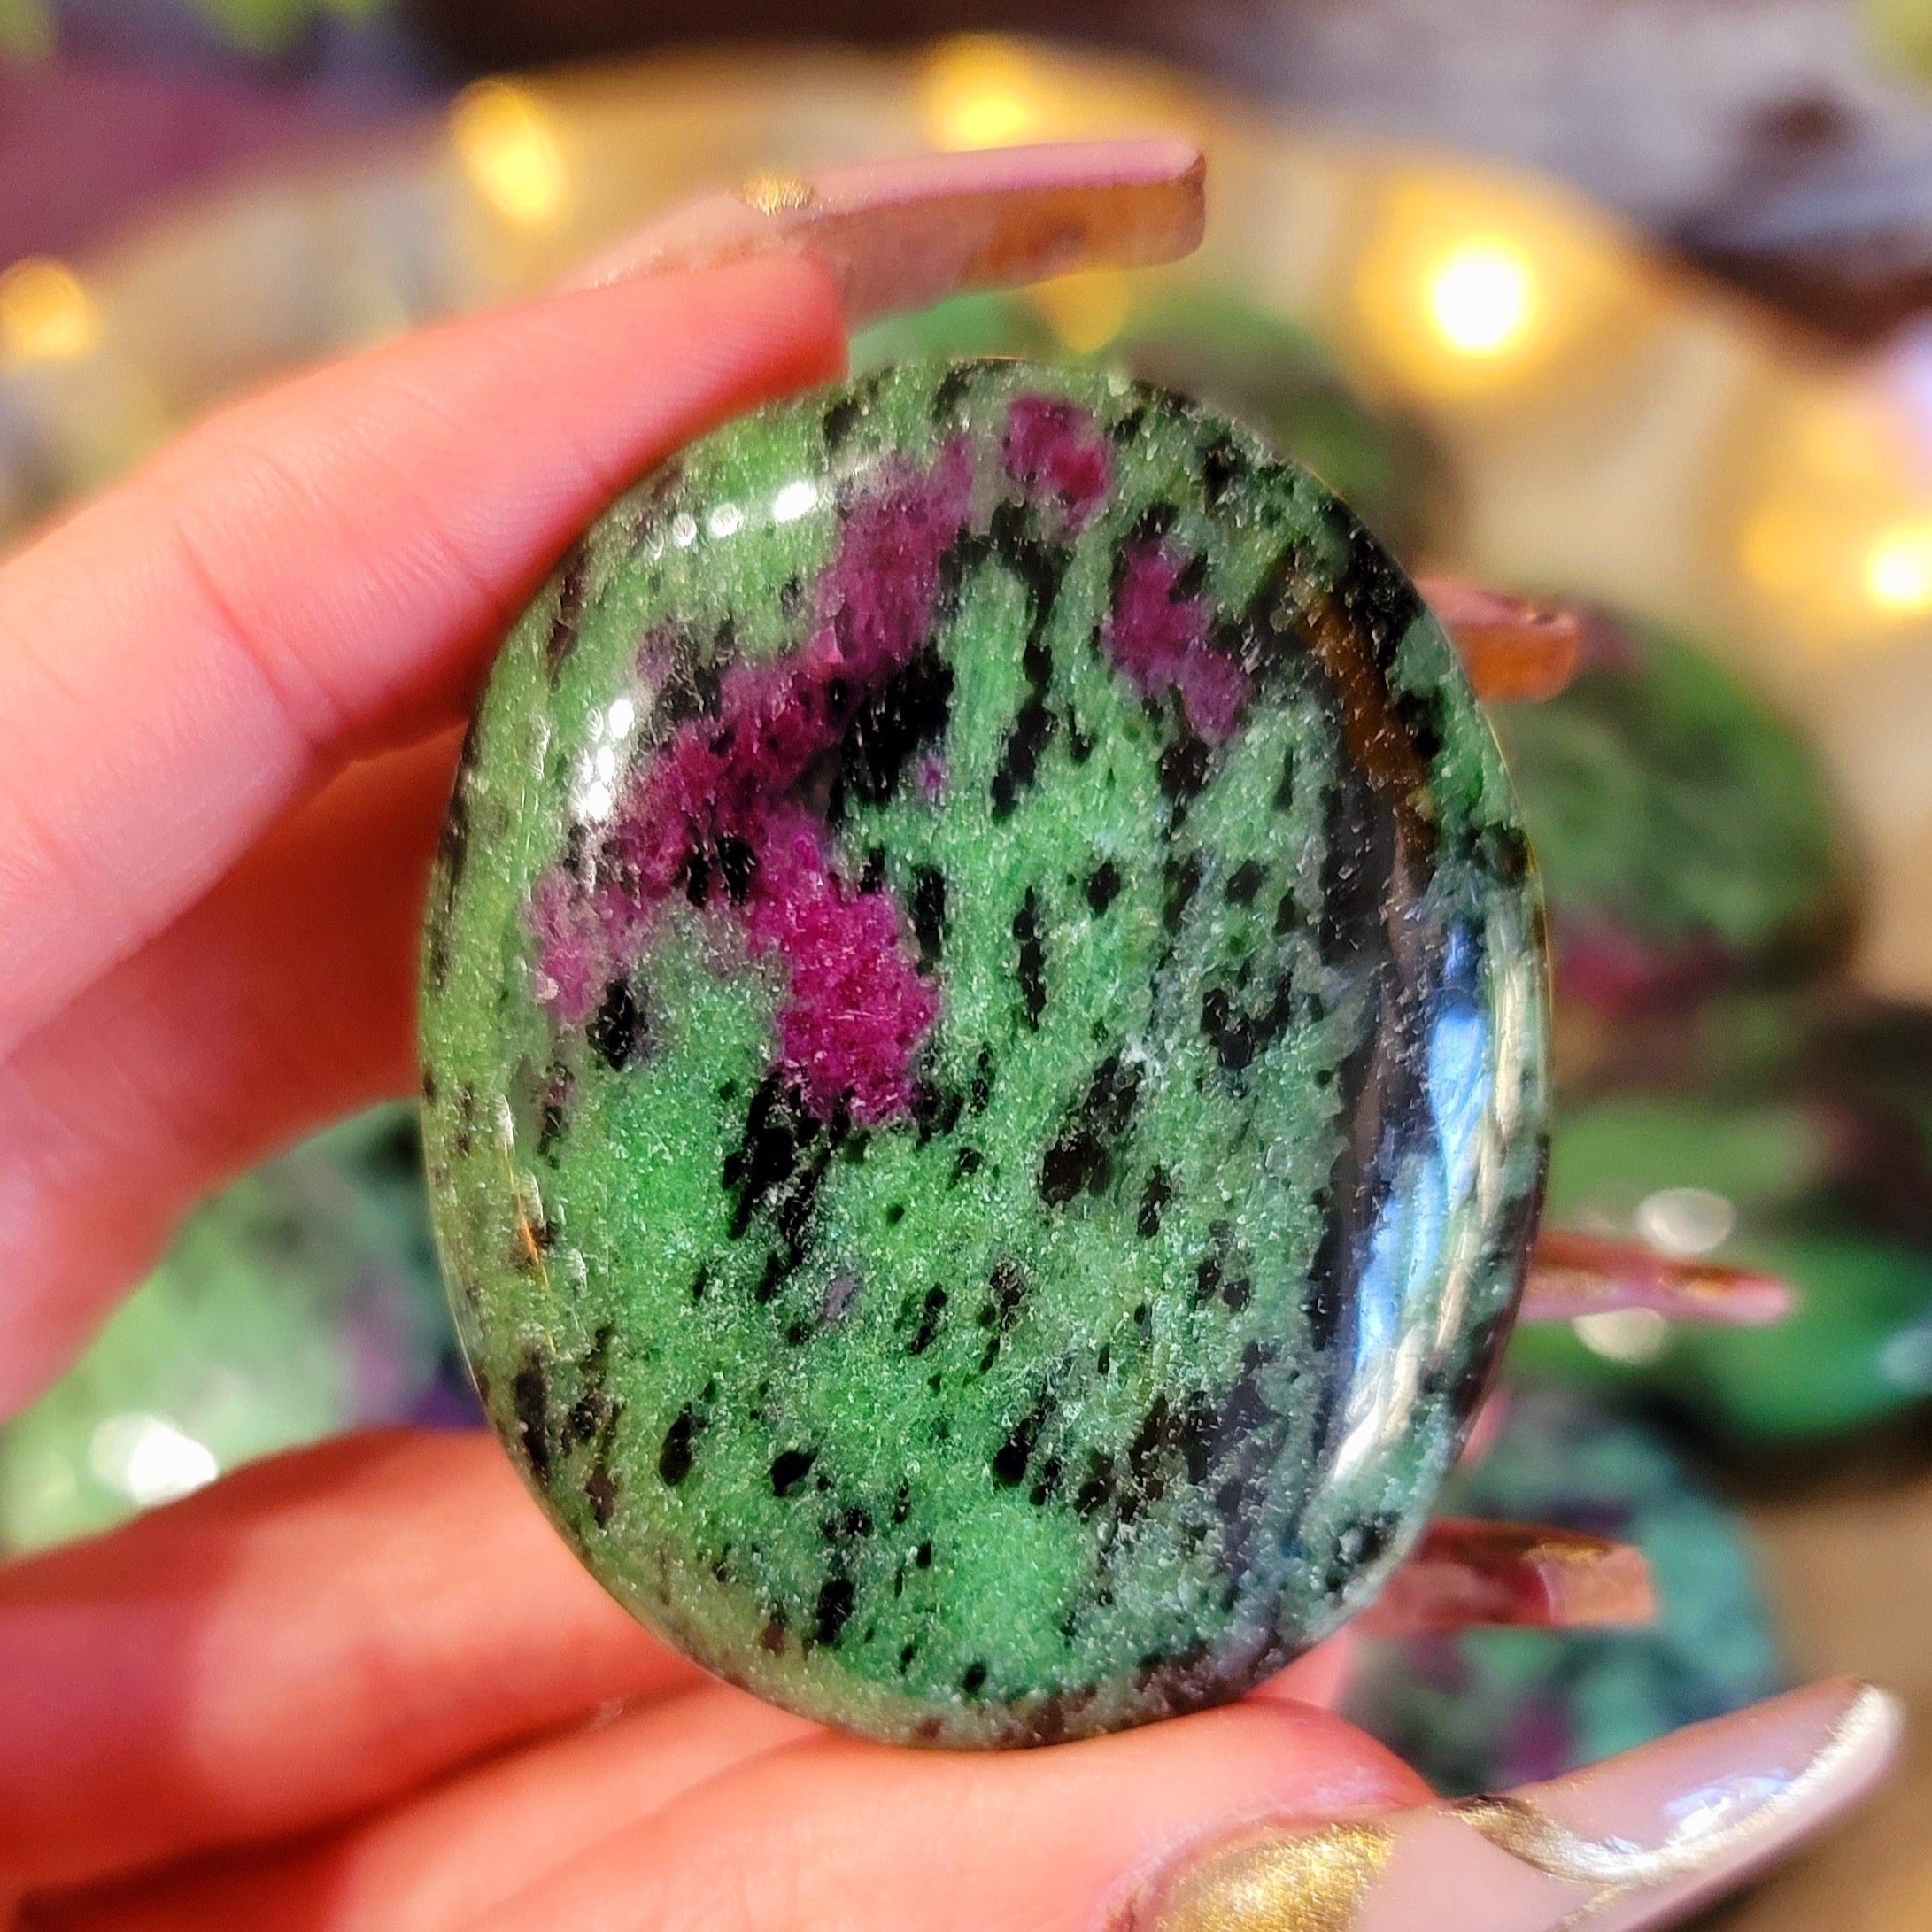 Ruby Zoisite Palm (High Quality) for Awakening, Courage and Manifesting